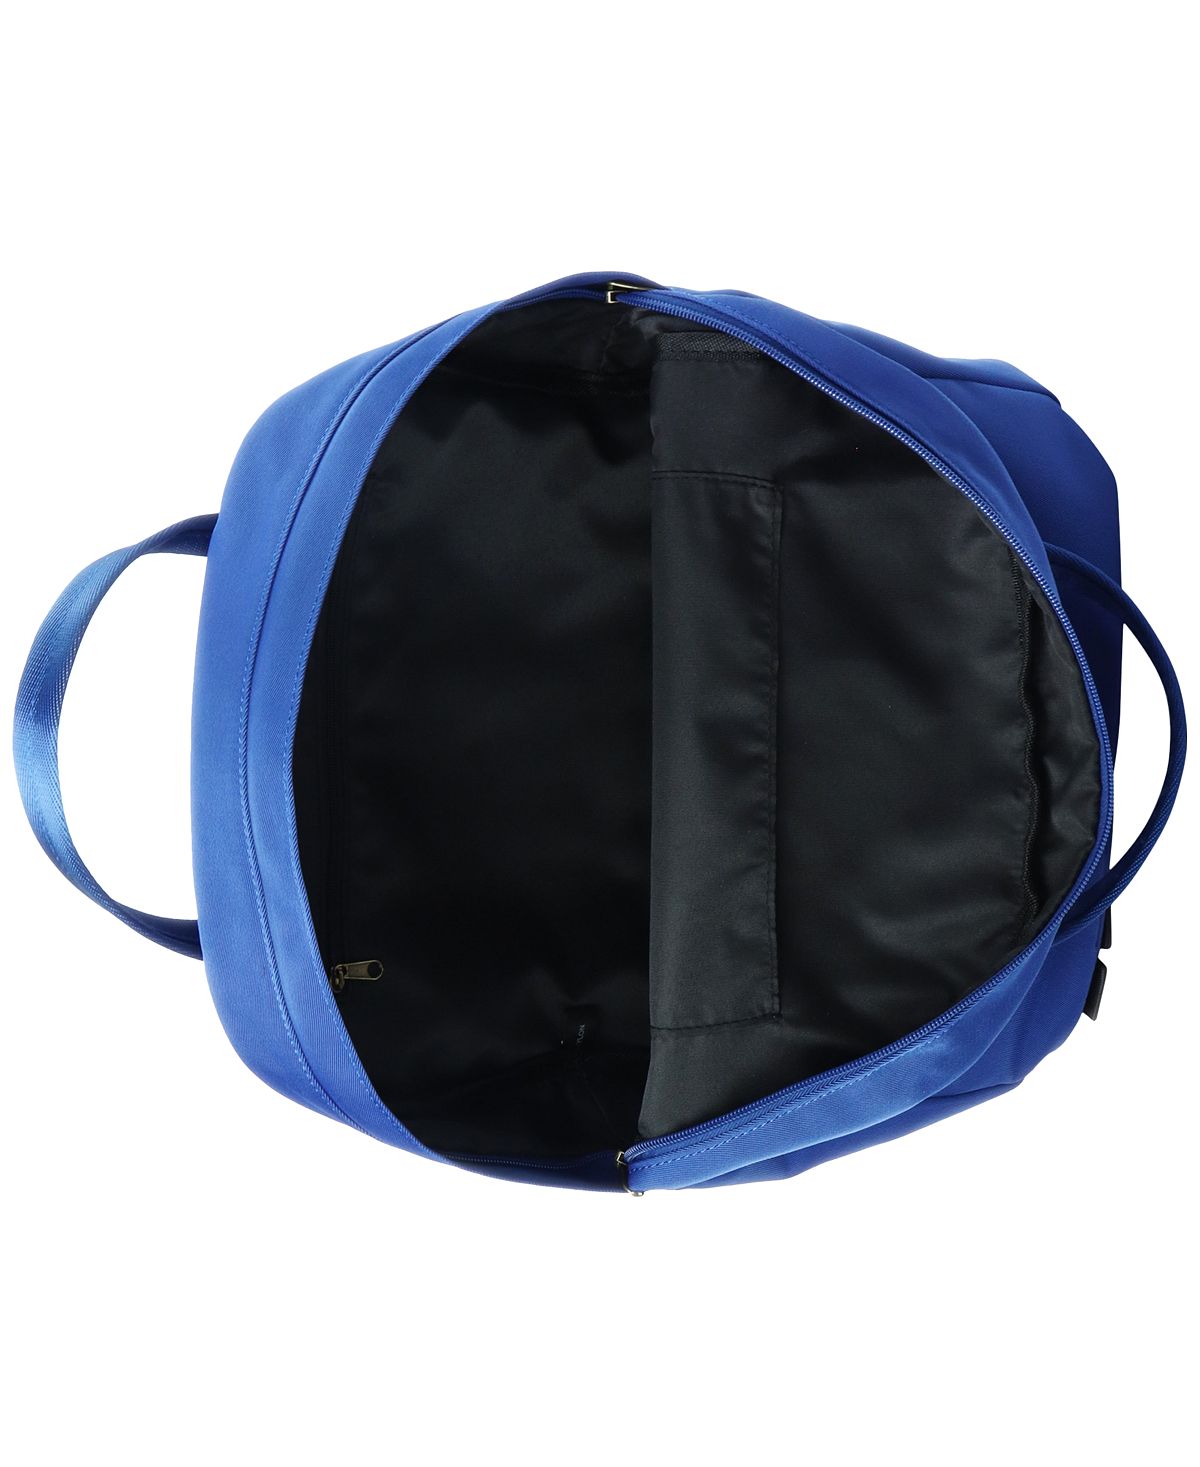 Club Room Solid Backpack Blue